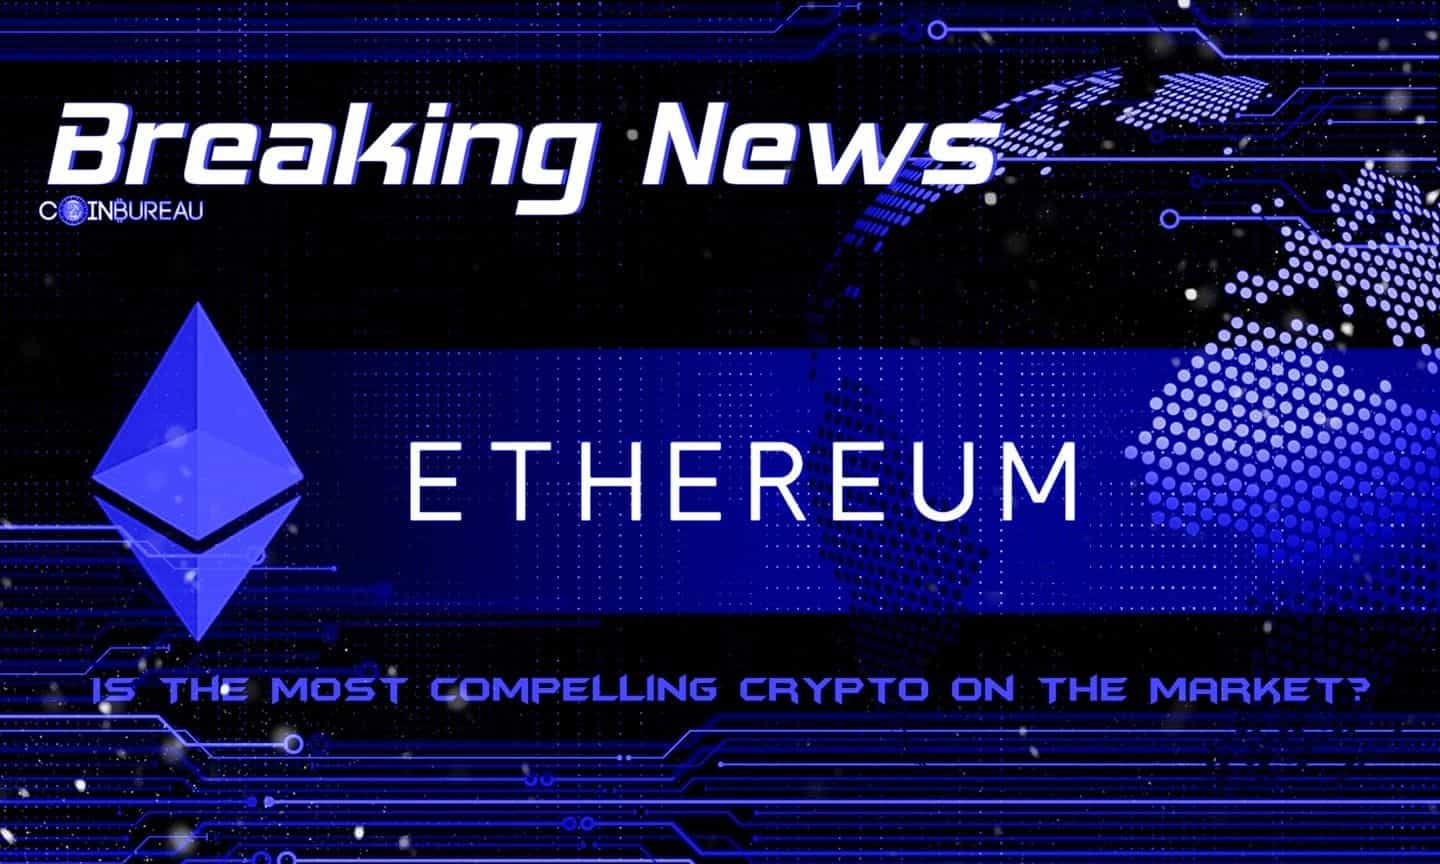 Institutions Think Ethereum Is the Most Compelling Crypto on the Market, According to CoinShares